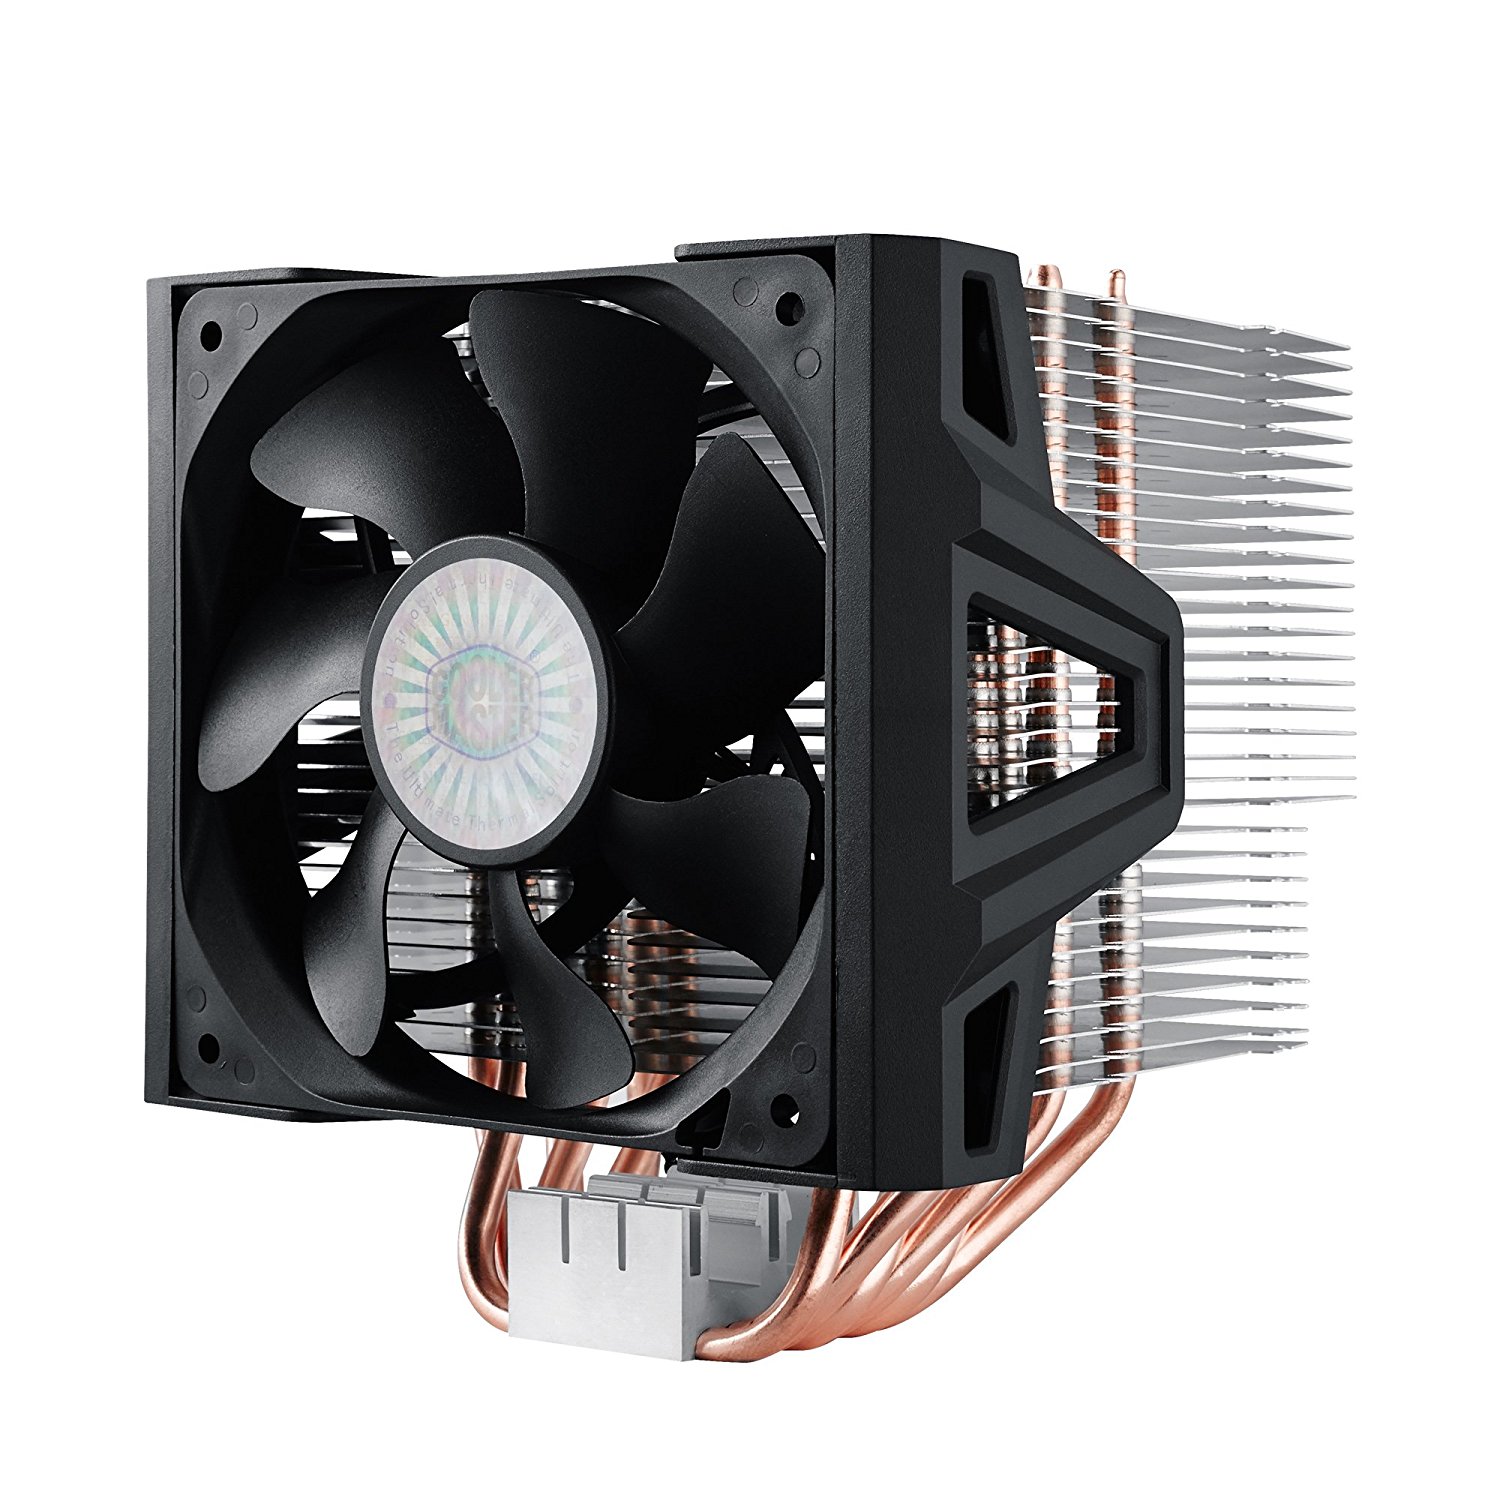 Cooler Master Hyper 612 Ver.2 - Silent CPU Air Cooler with 6 Direct Contact Heatpipes and Folding Fin Structure (RR-H6V2-13PK-R1) - image 3 of 10